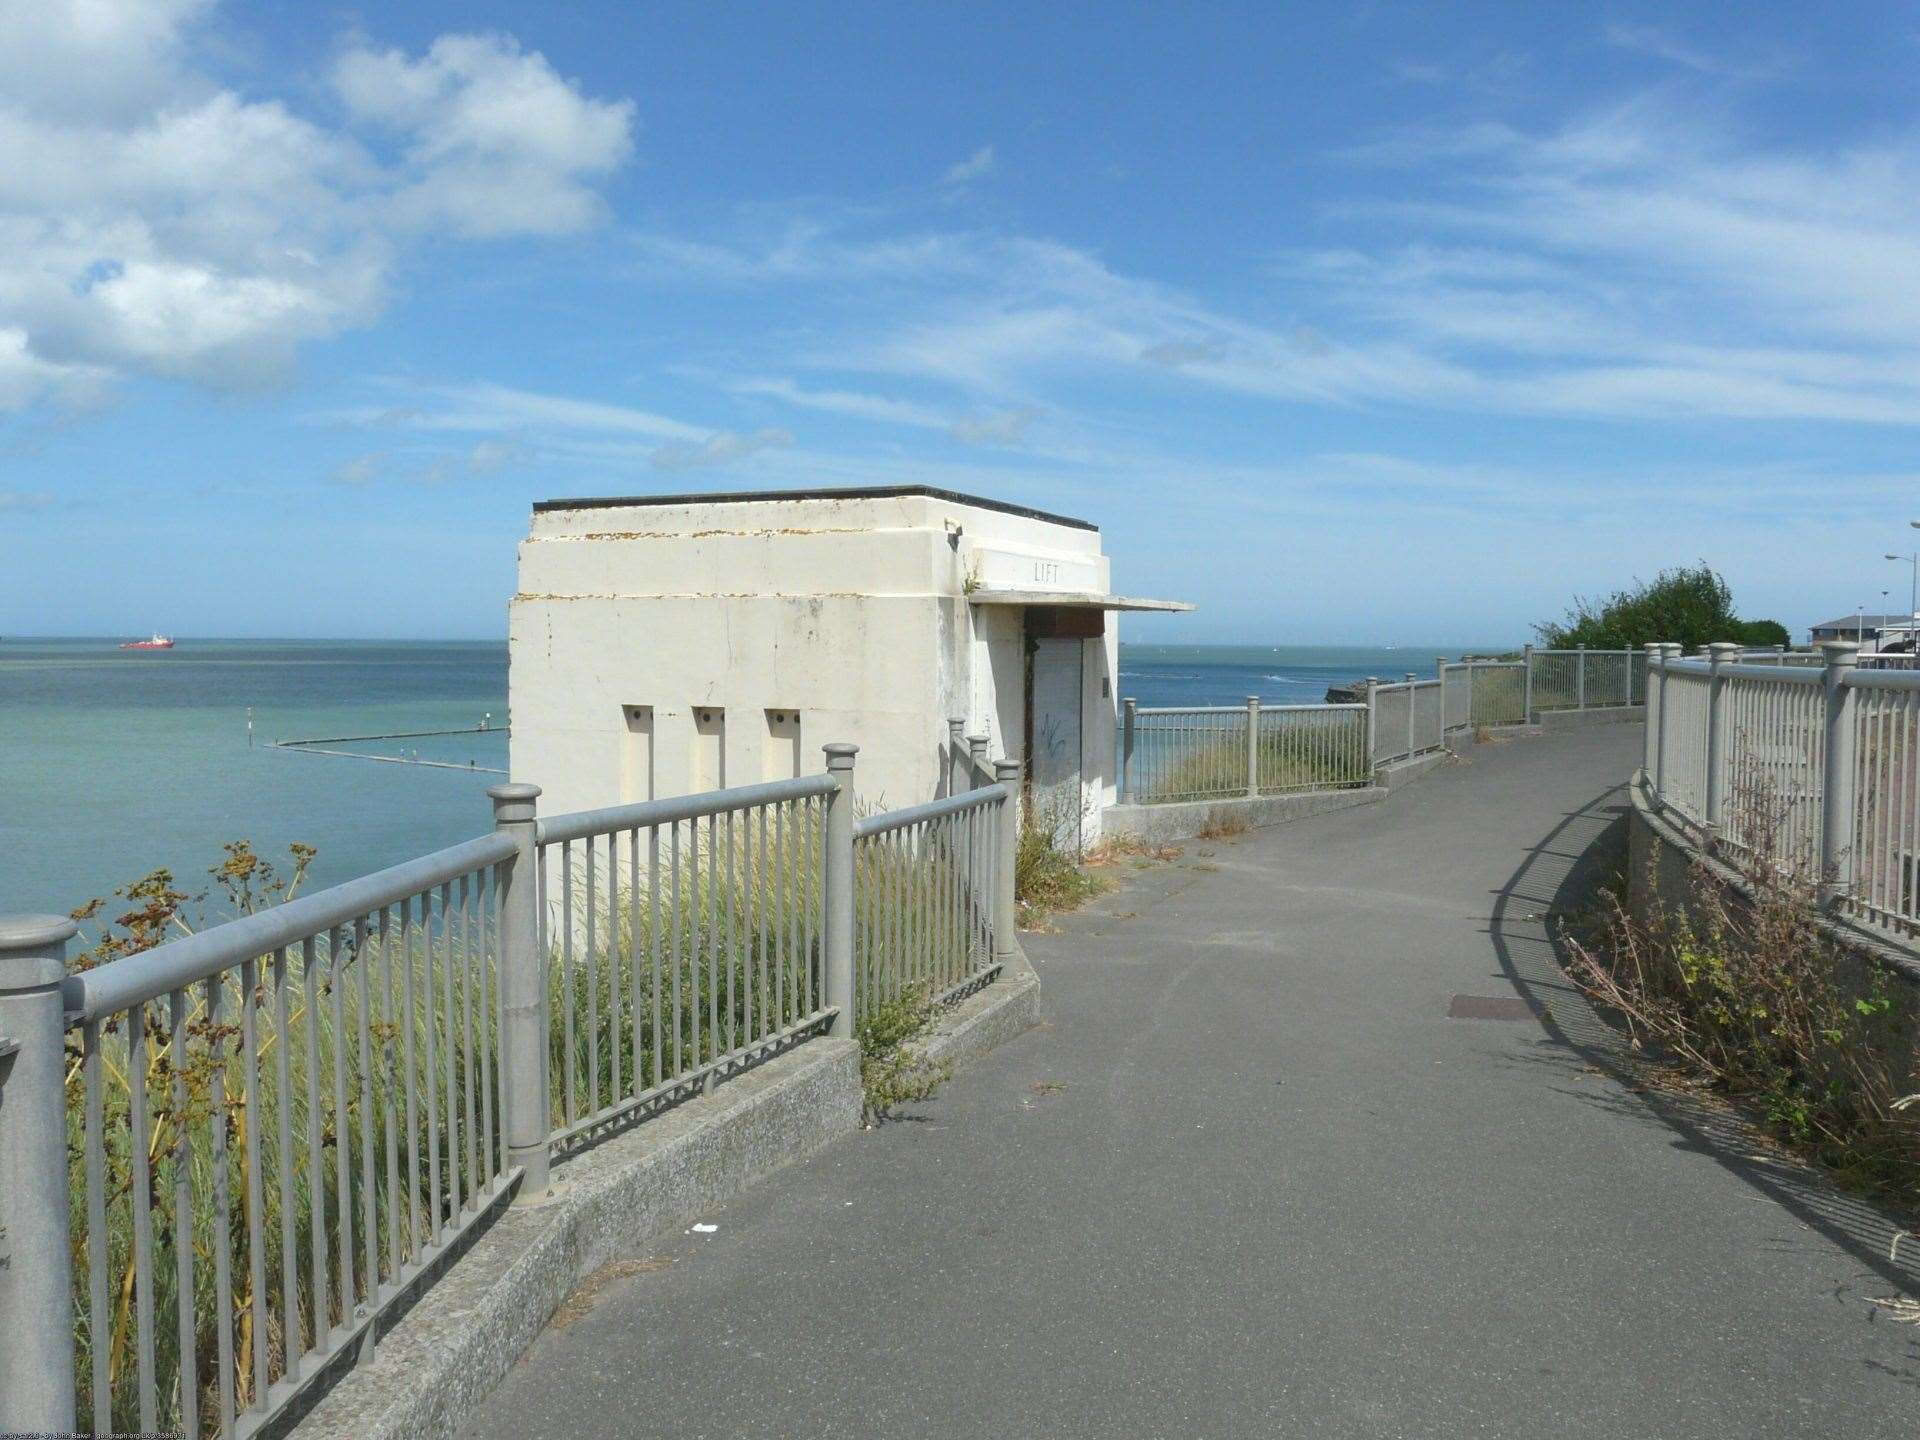 The lift at Walpole Bay, Margate could be restored to working order. Picture: Thanet District Council